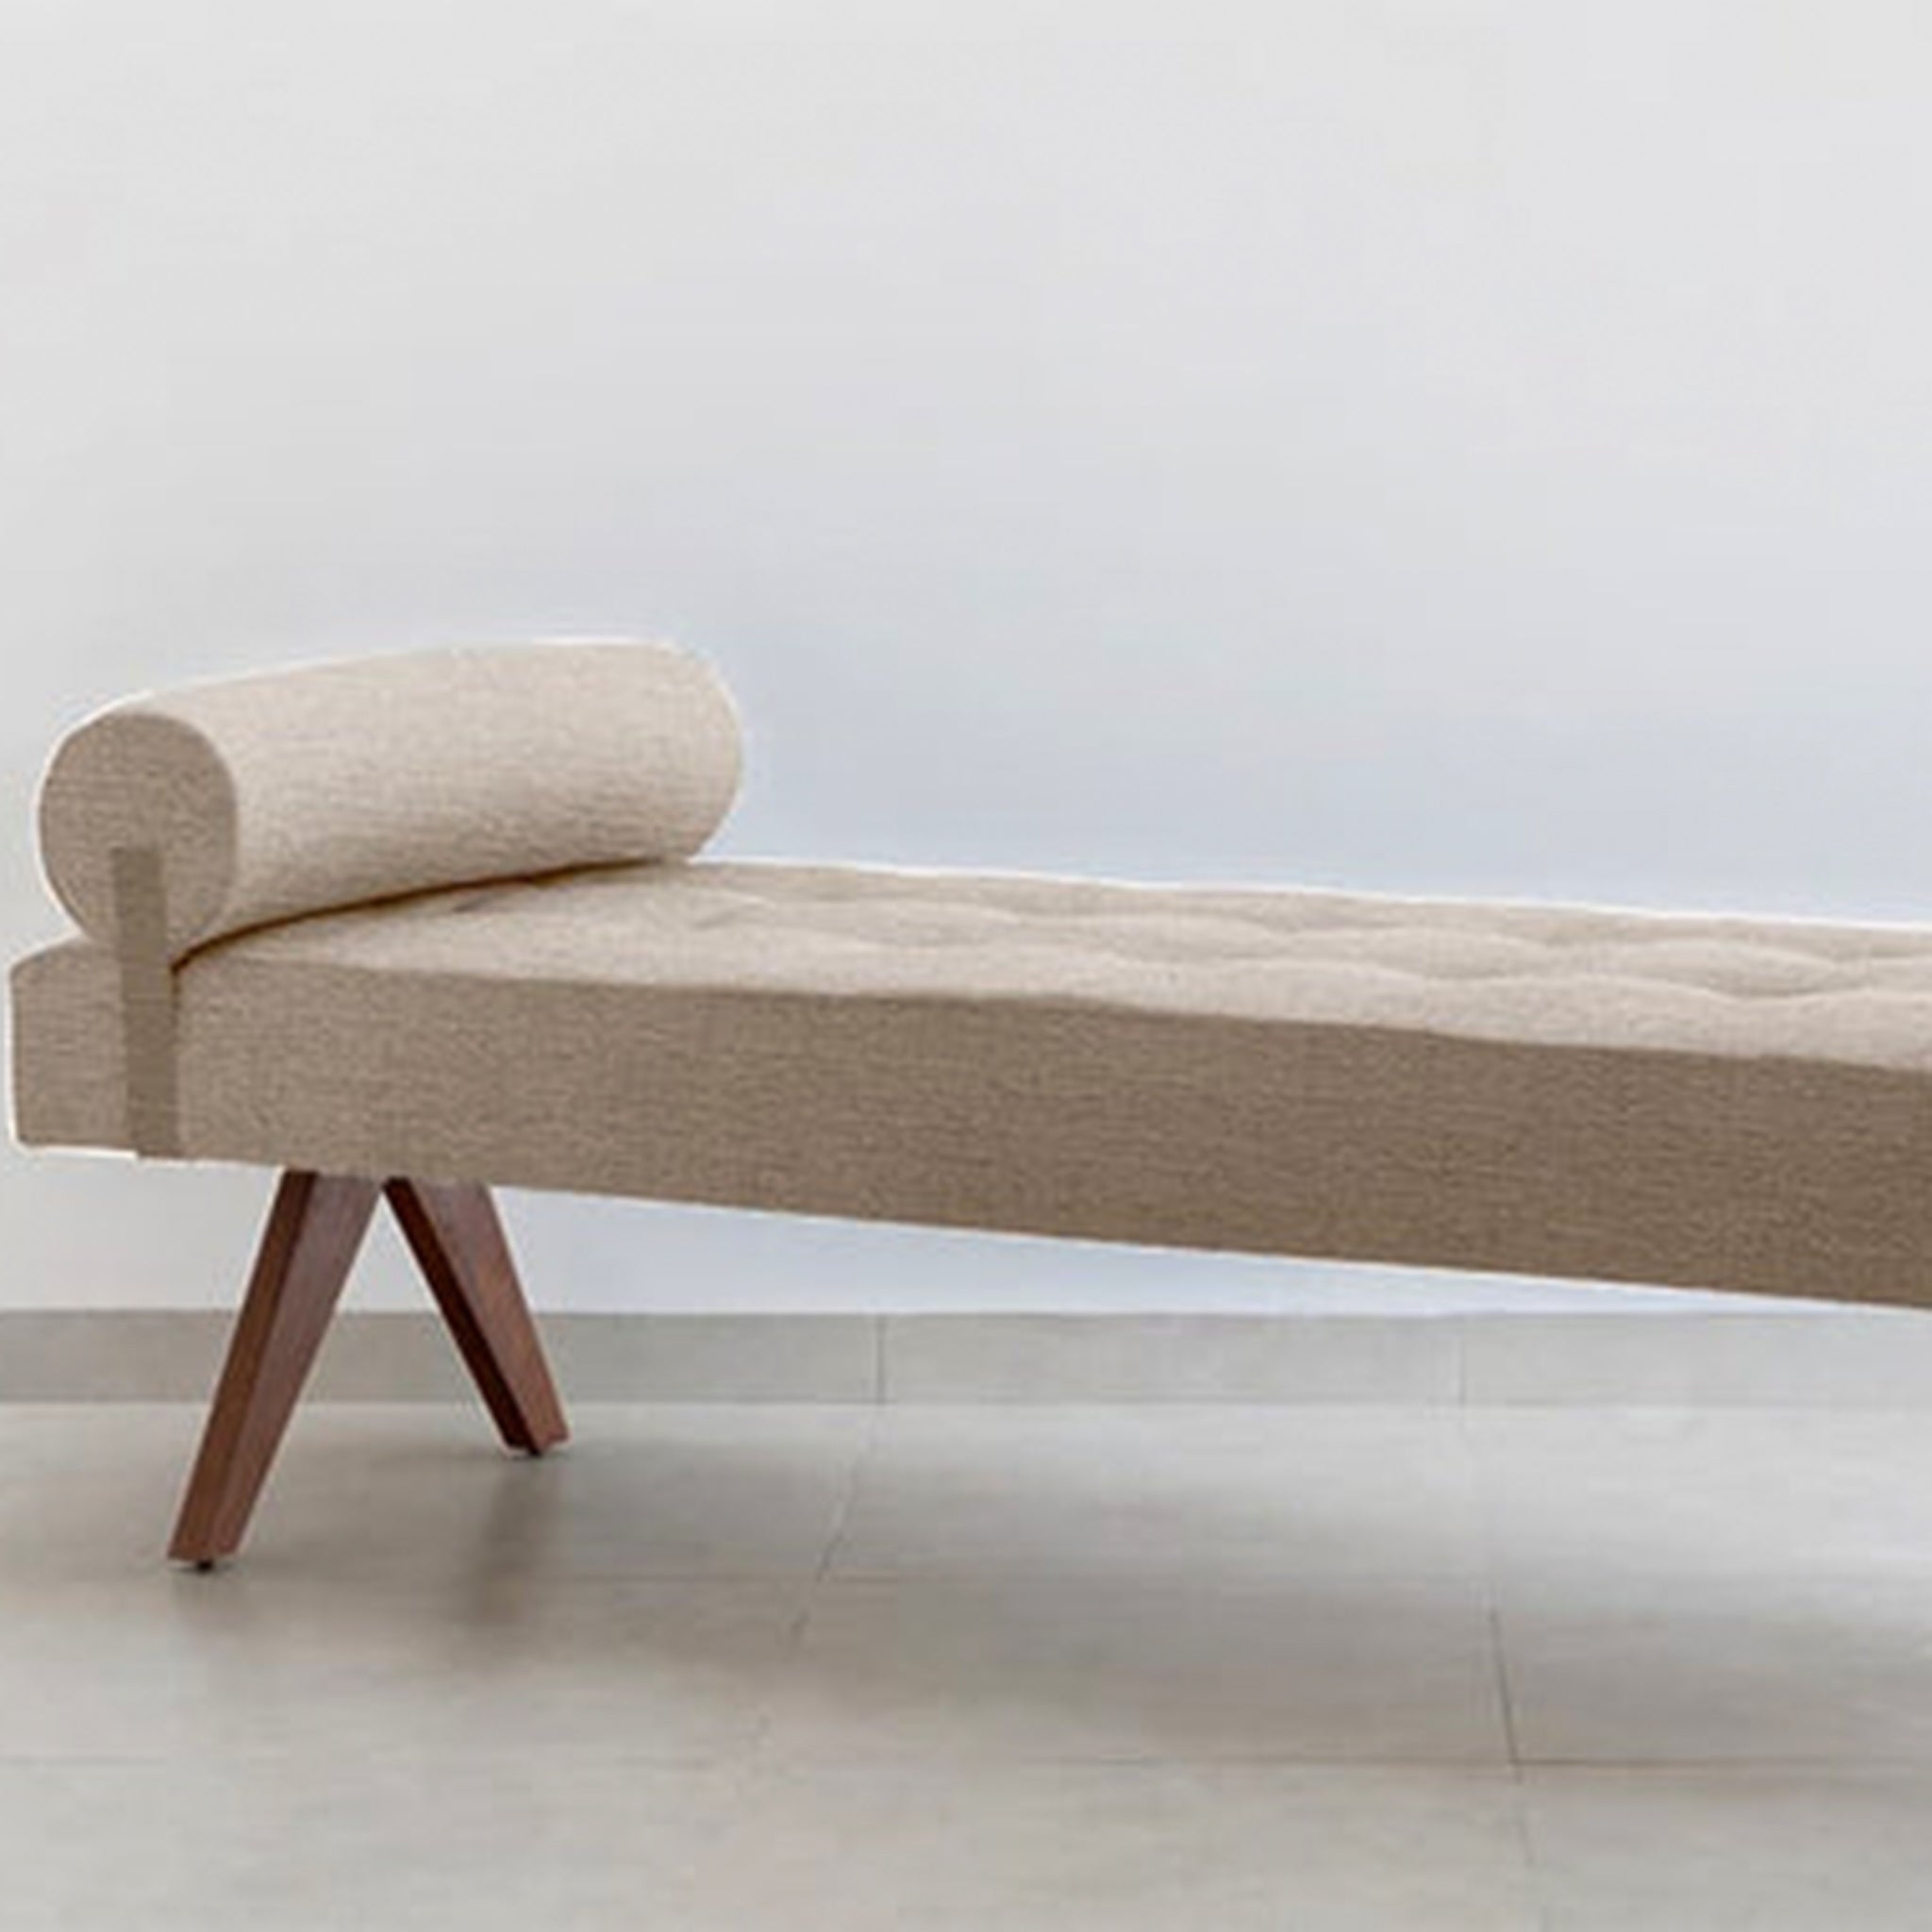 The Jack Daybed with understated elegance